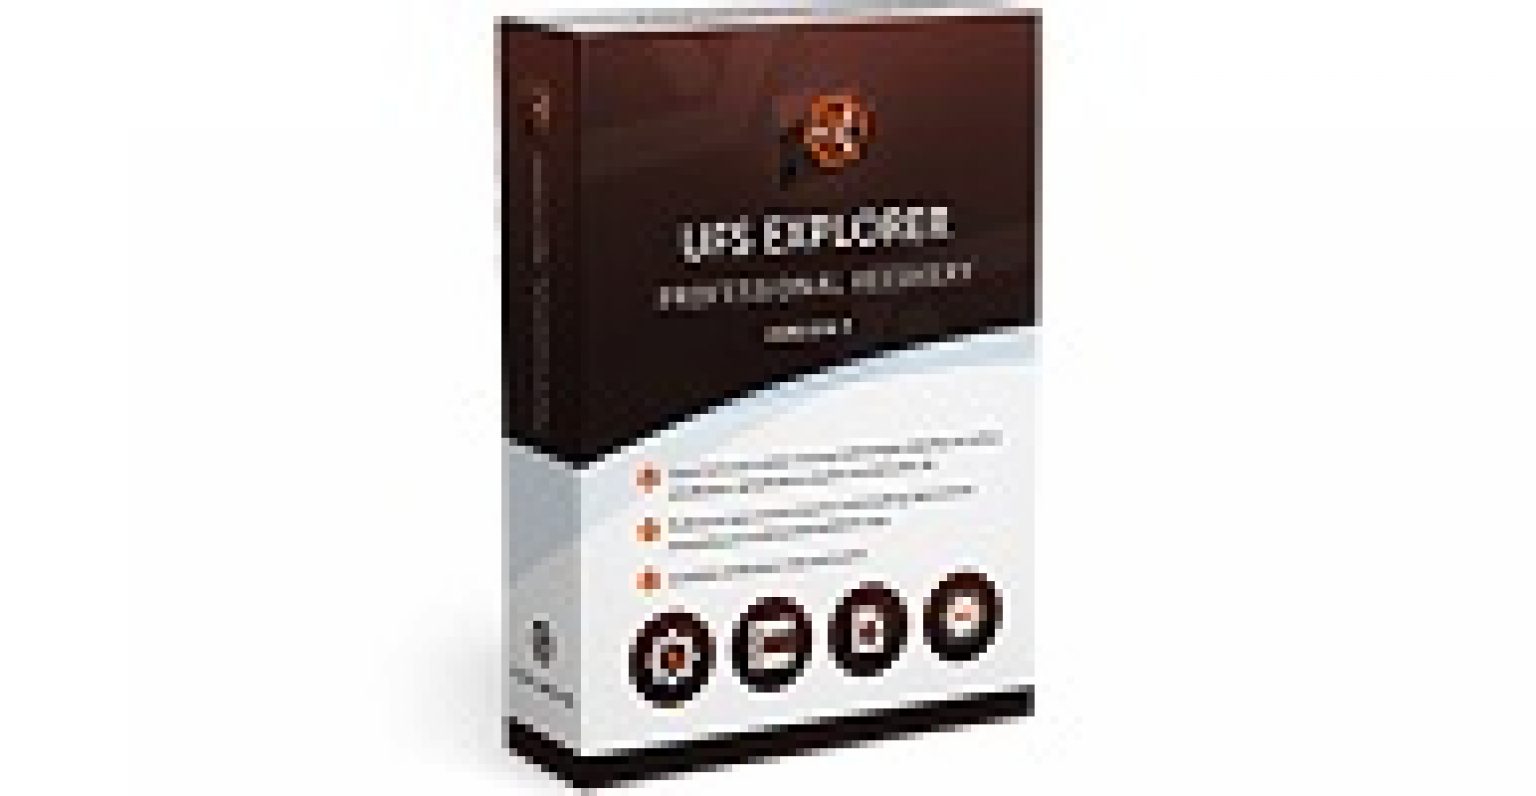 0 0 report ufs explorer professional recovery